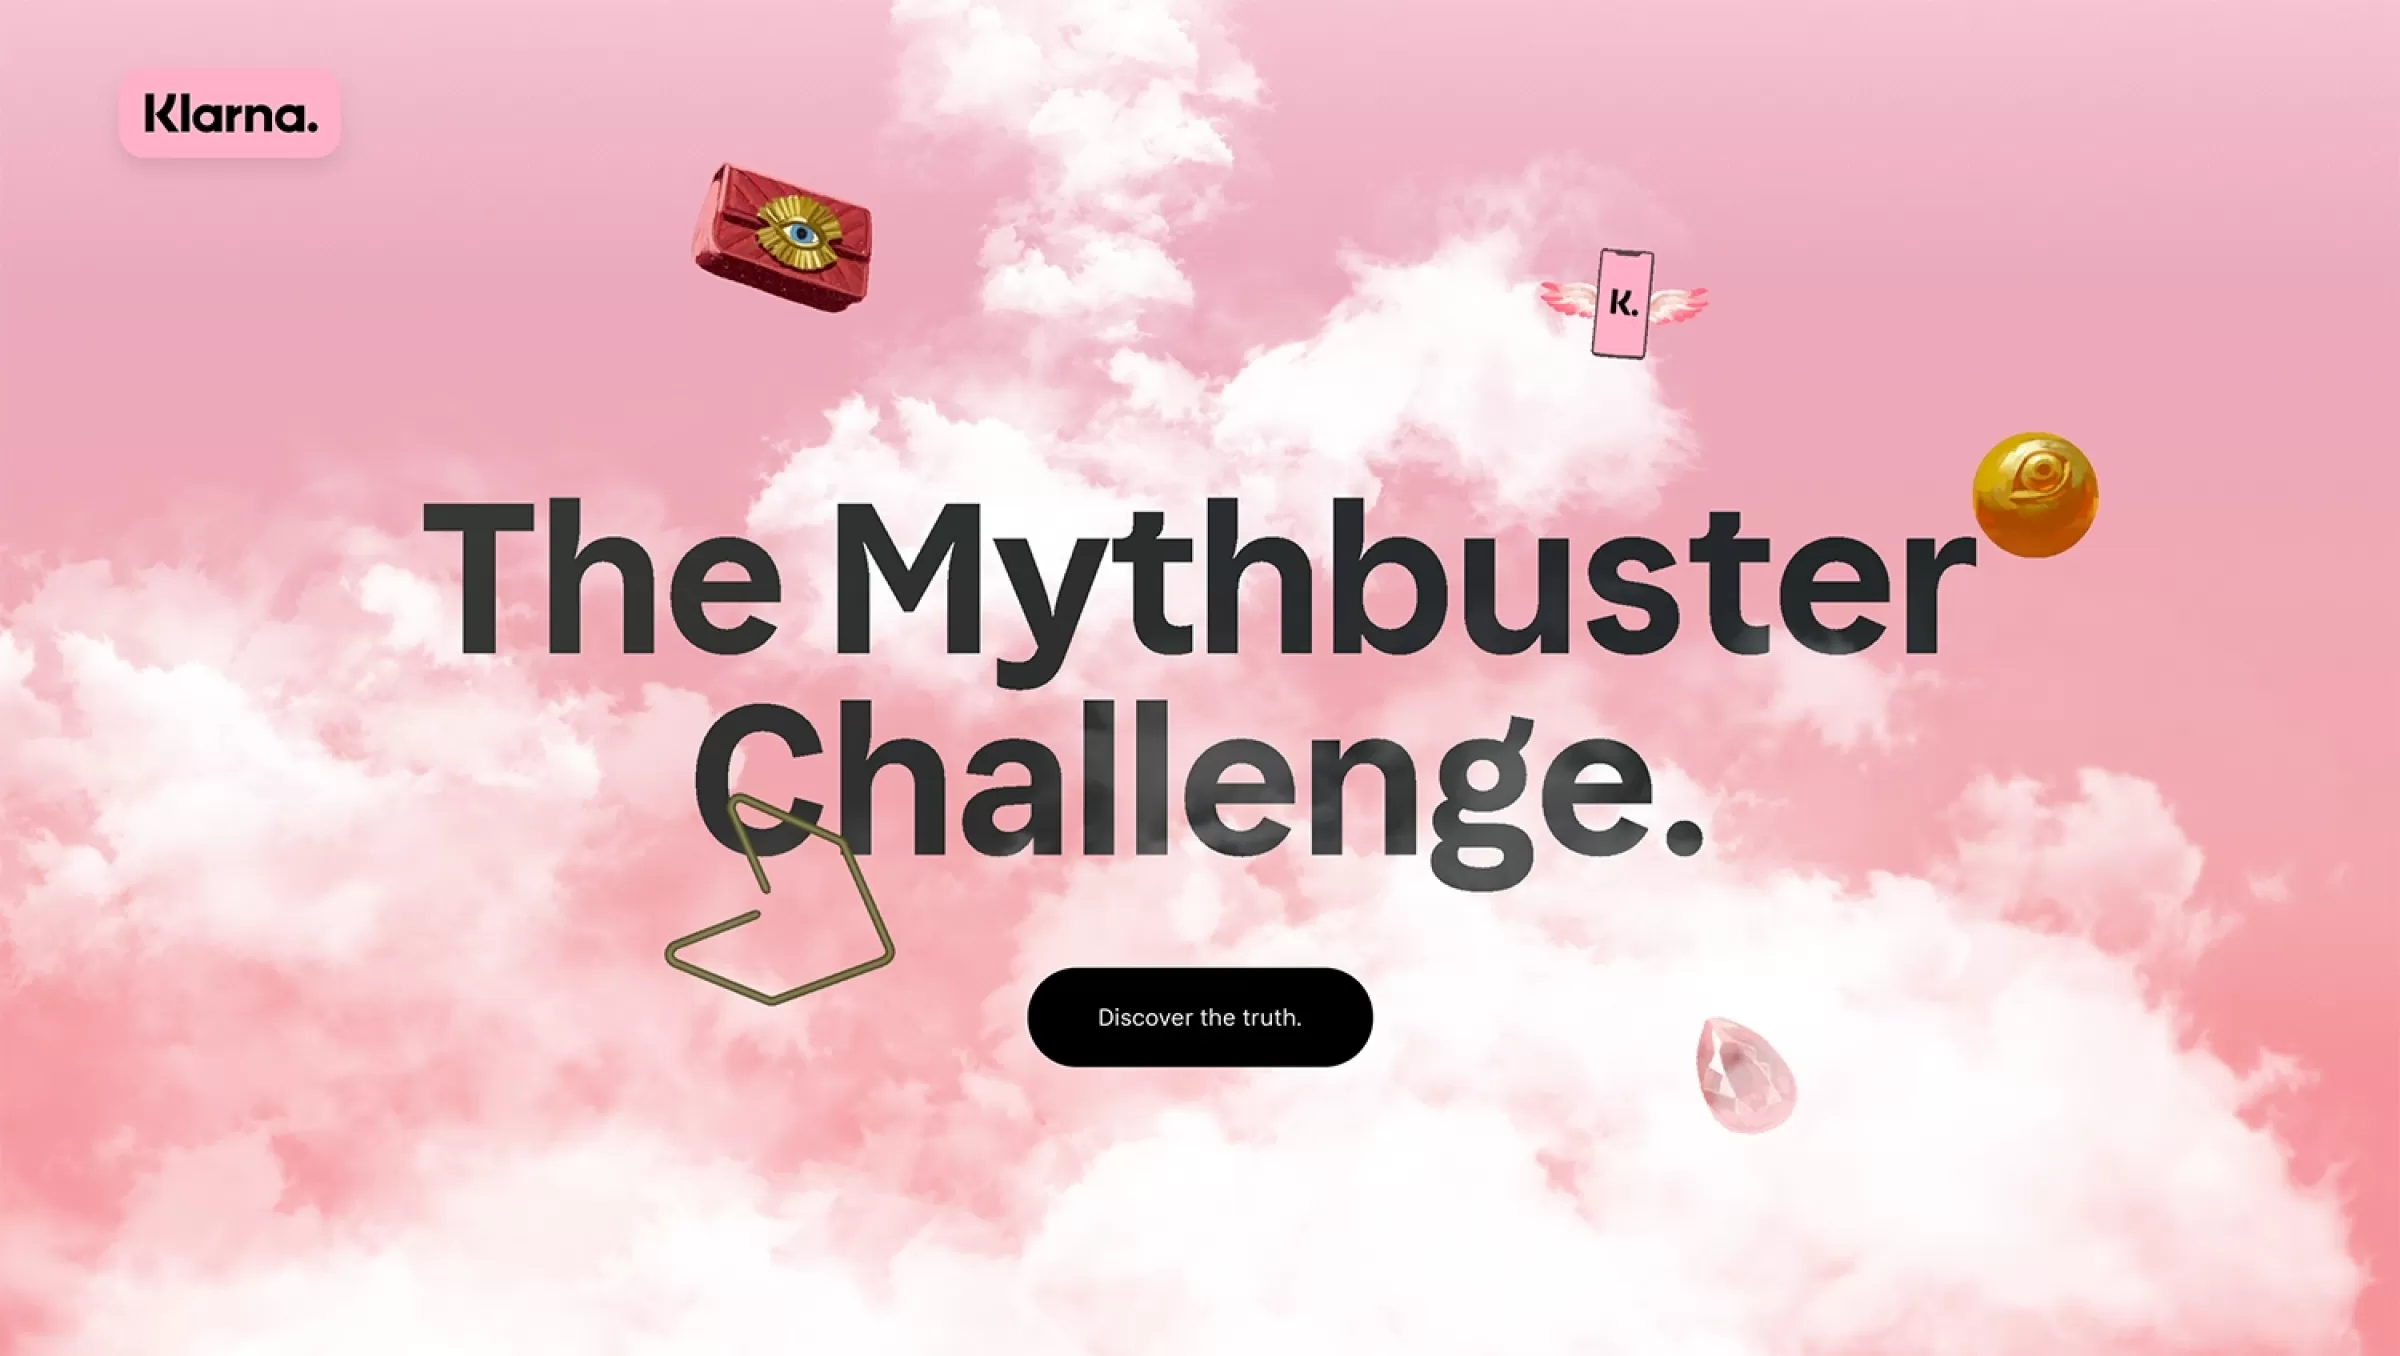 The Myth Buster Challenge